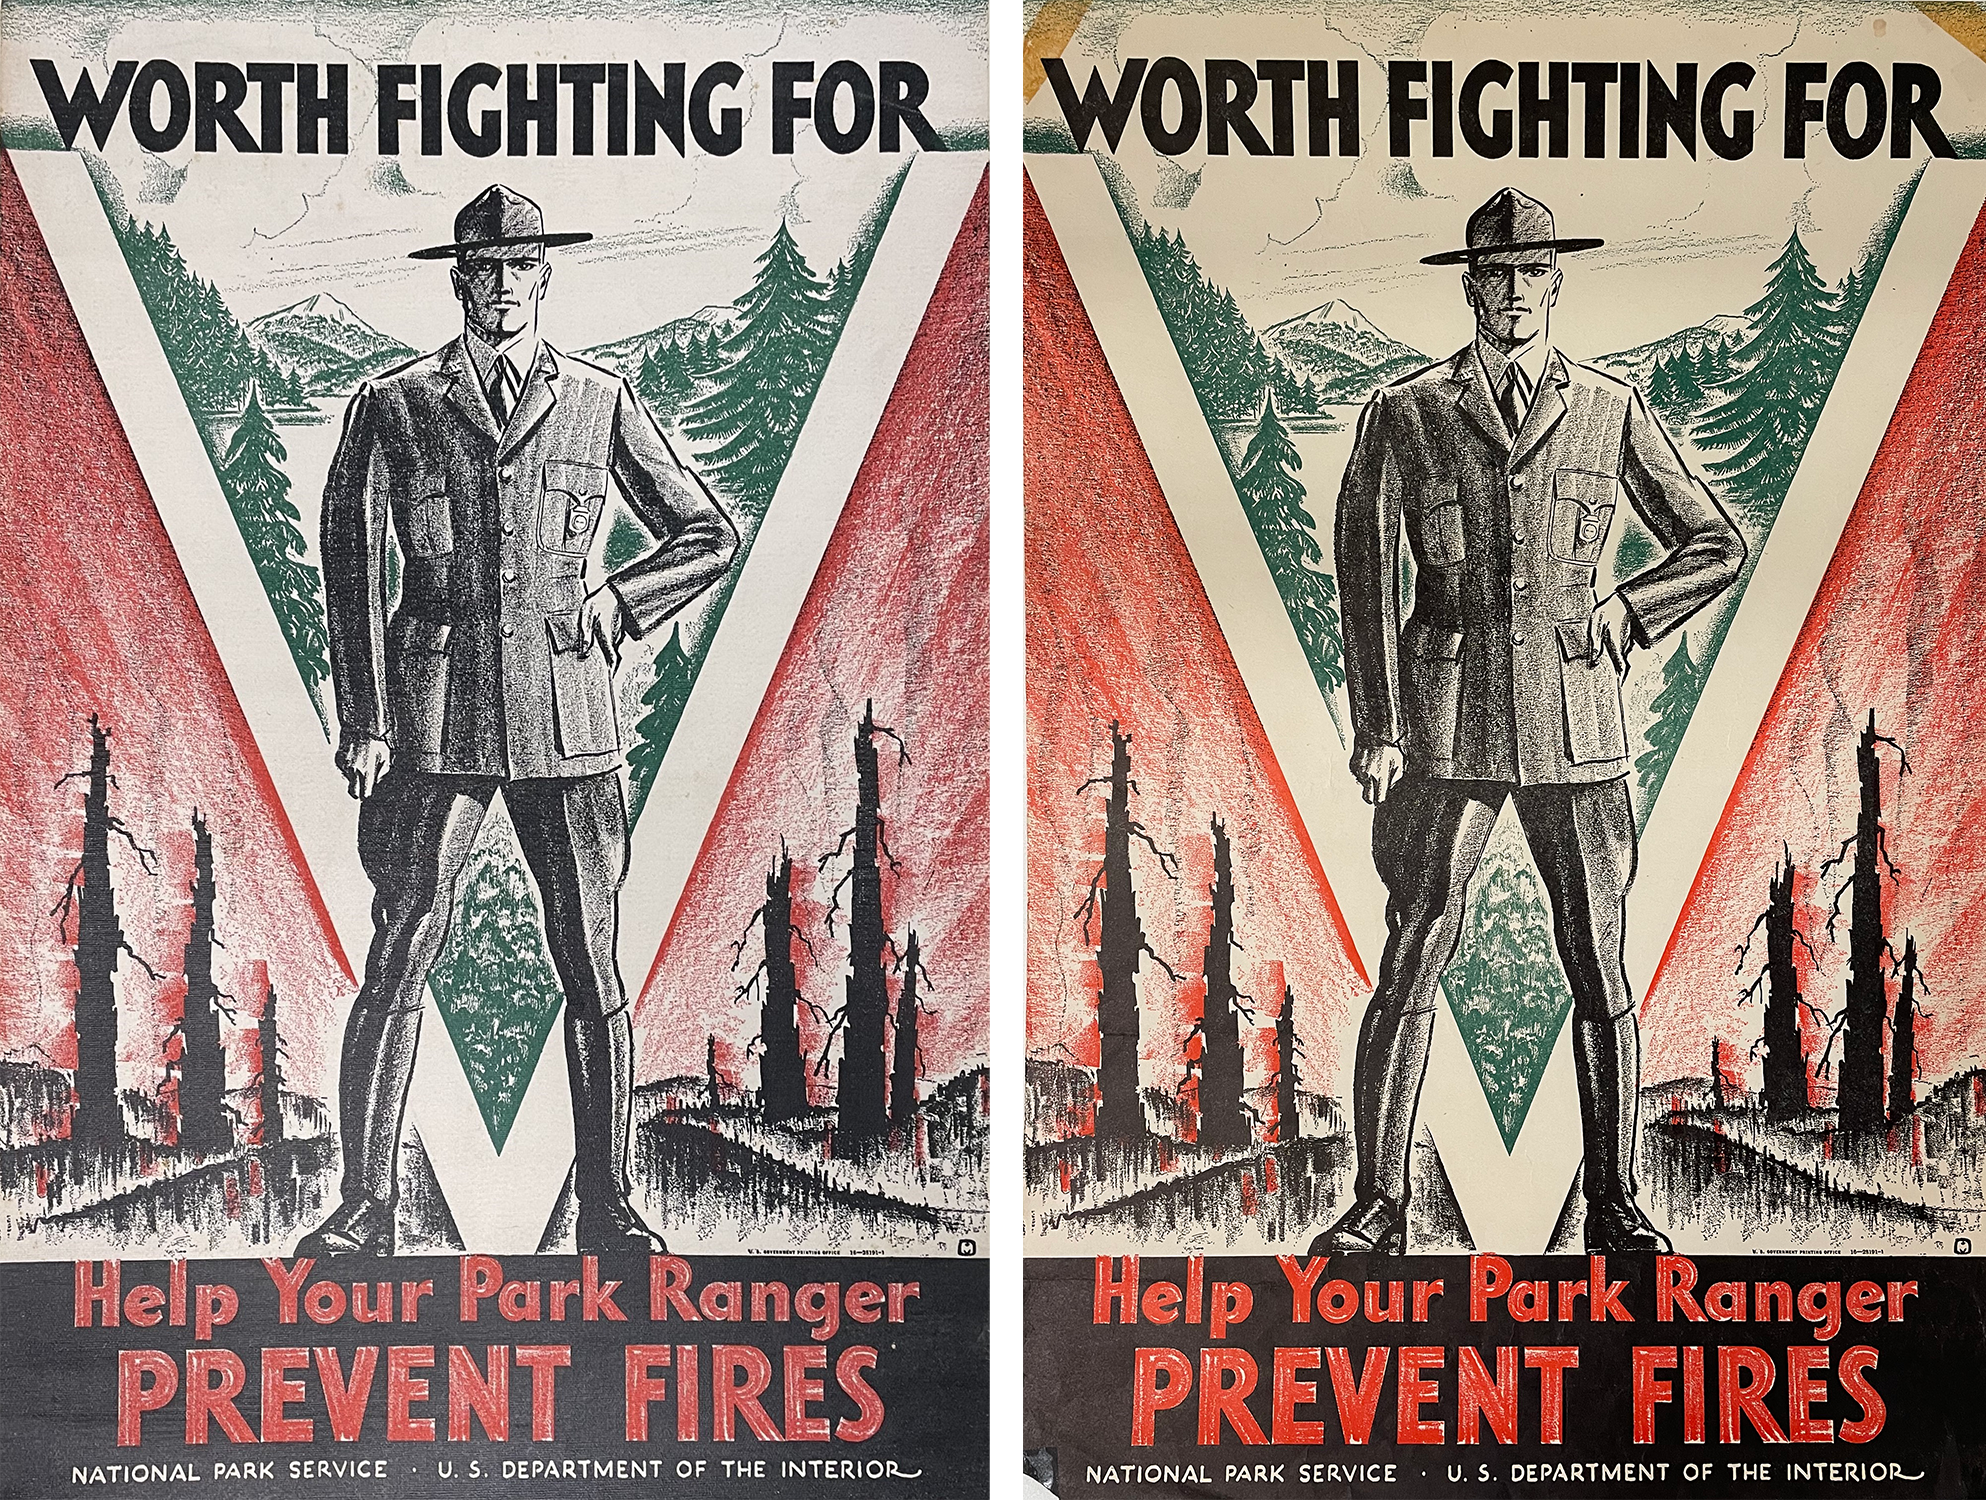 Two versions of the same "Worth Fighting For" posters with a ranger in a burned out landscape.